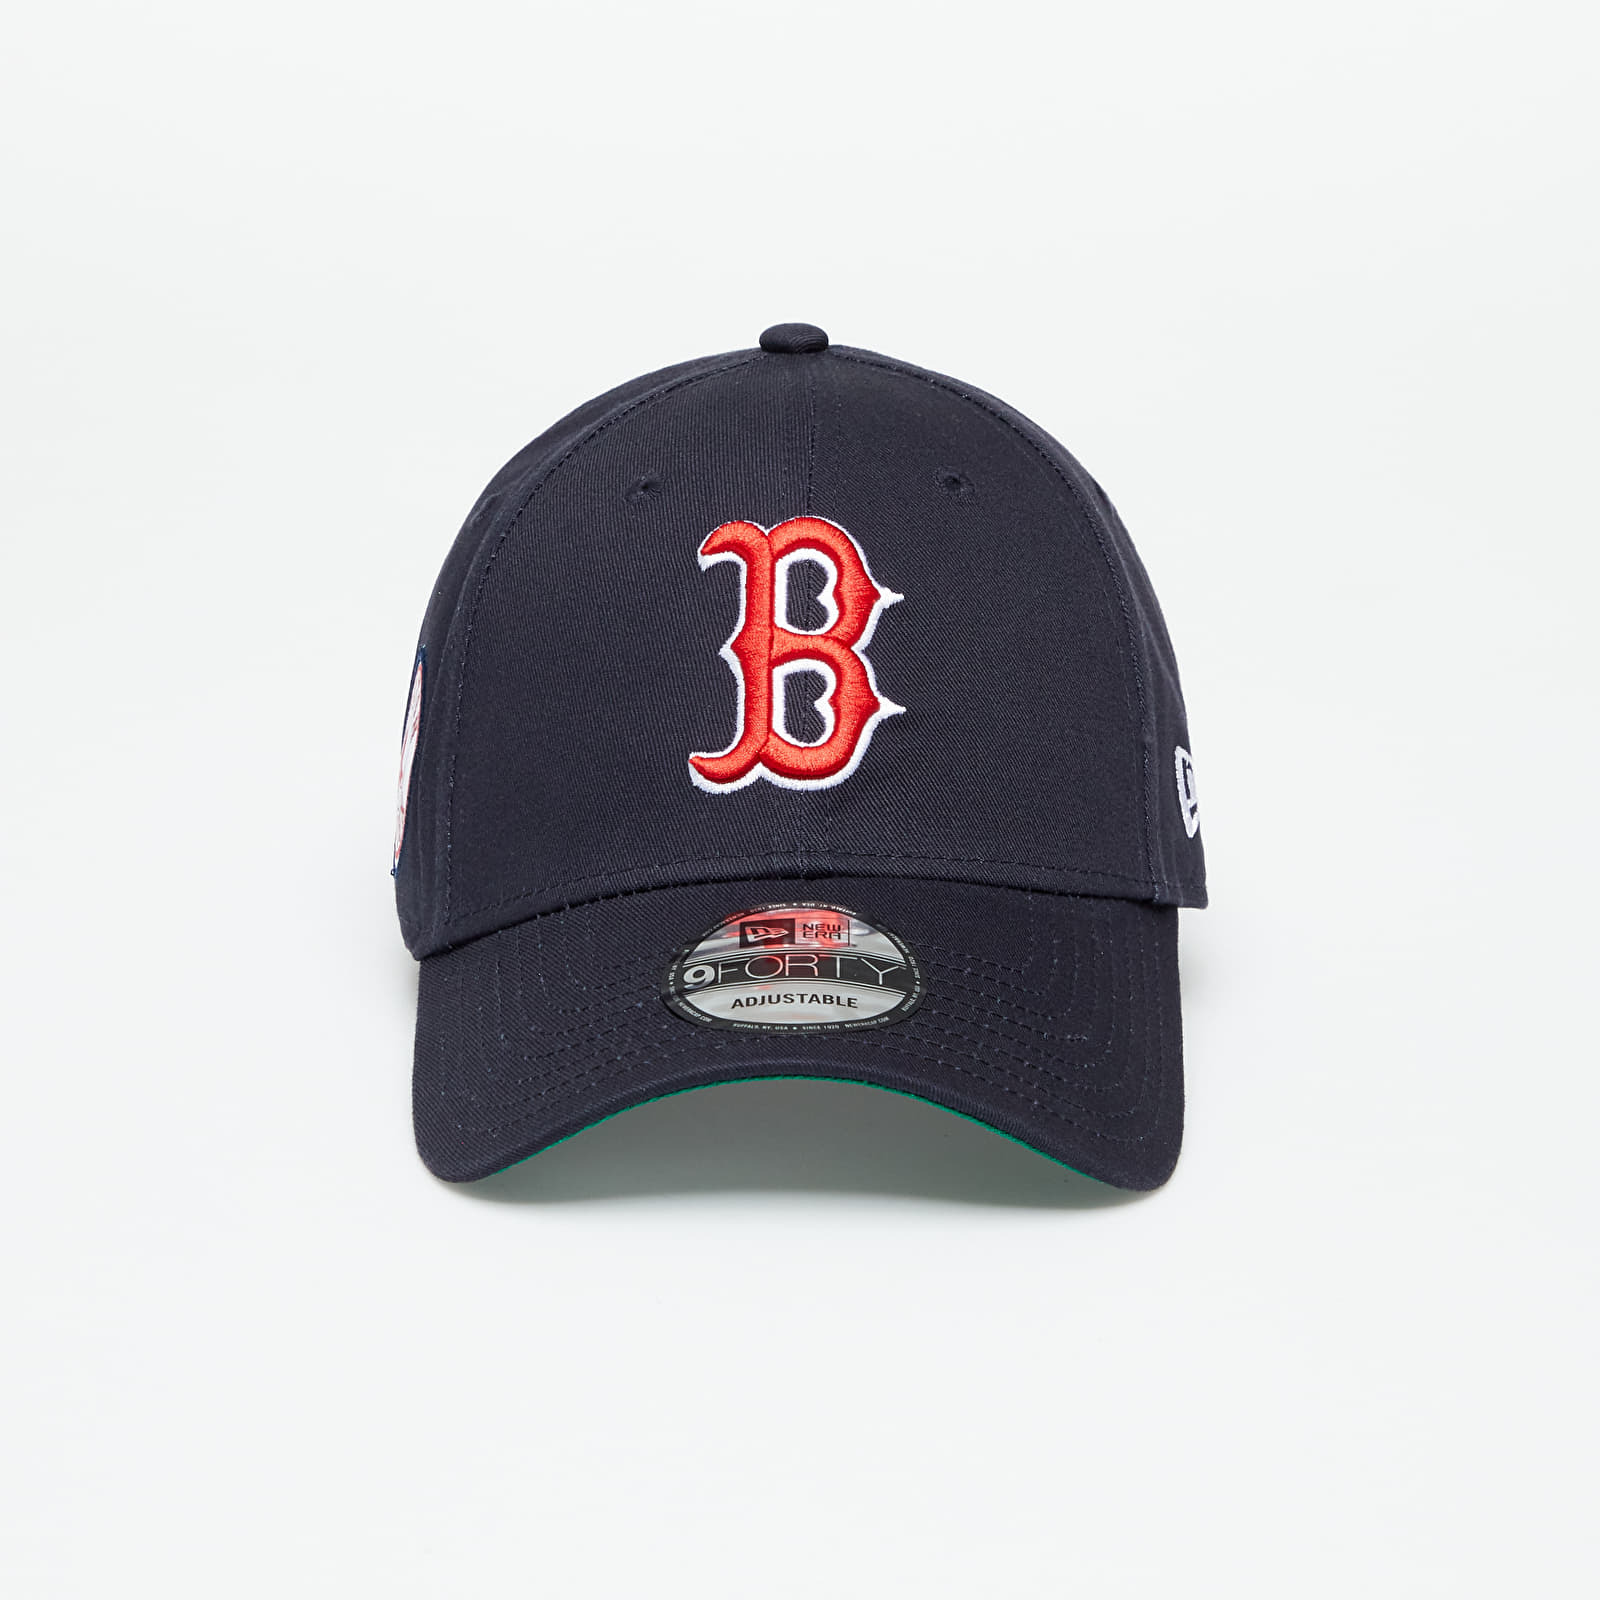 New Era - boston red sox team side patch 9forty adjustable cap navy/ scarlet